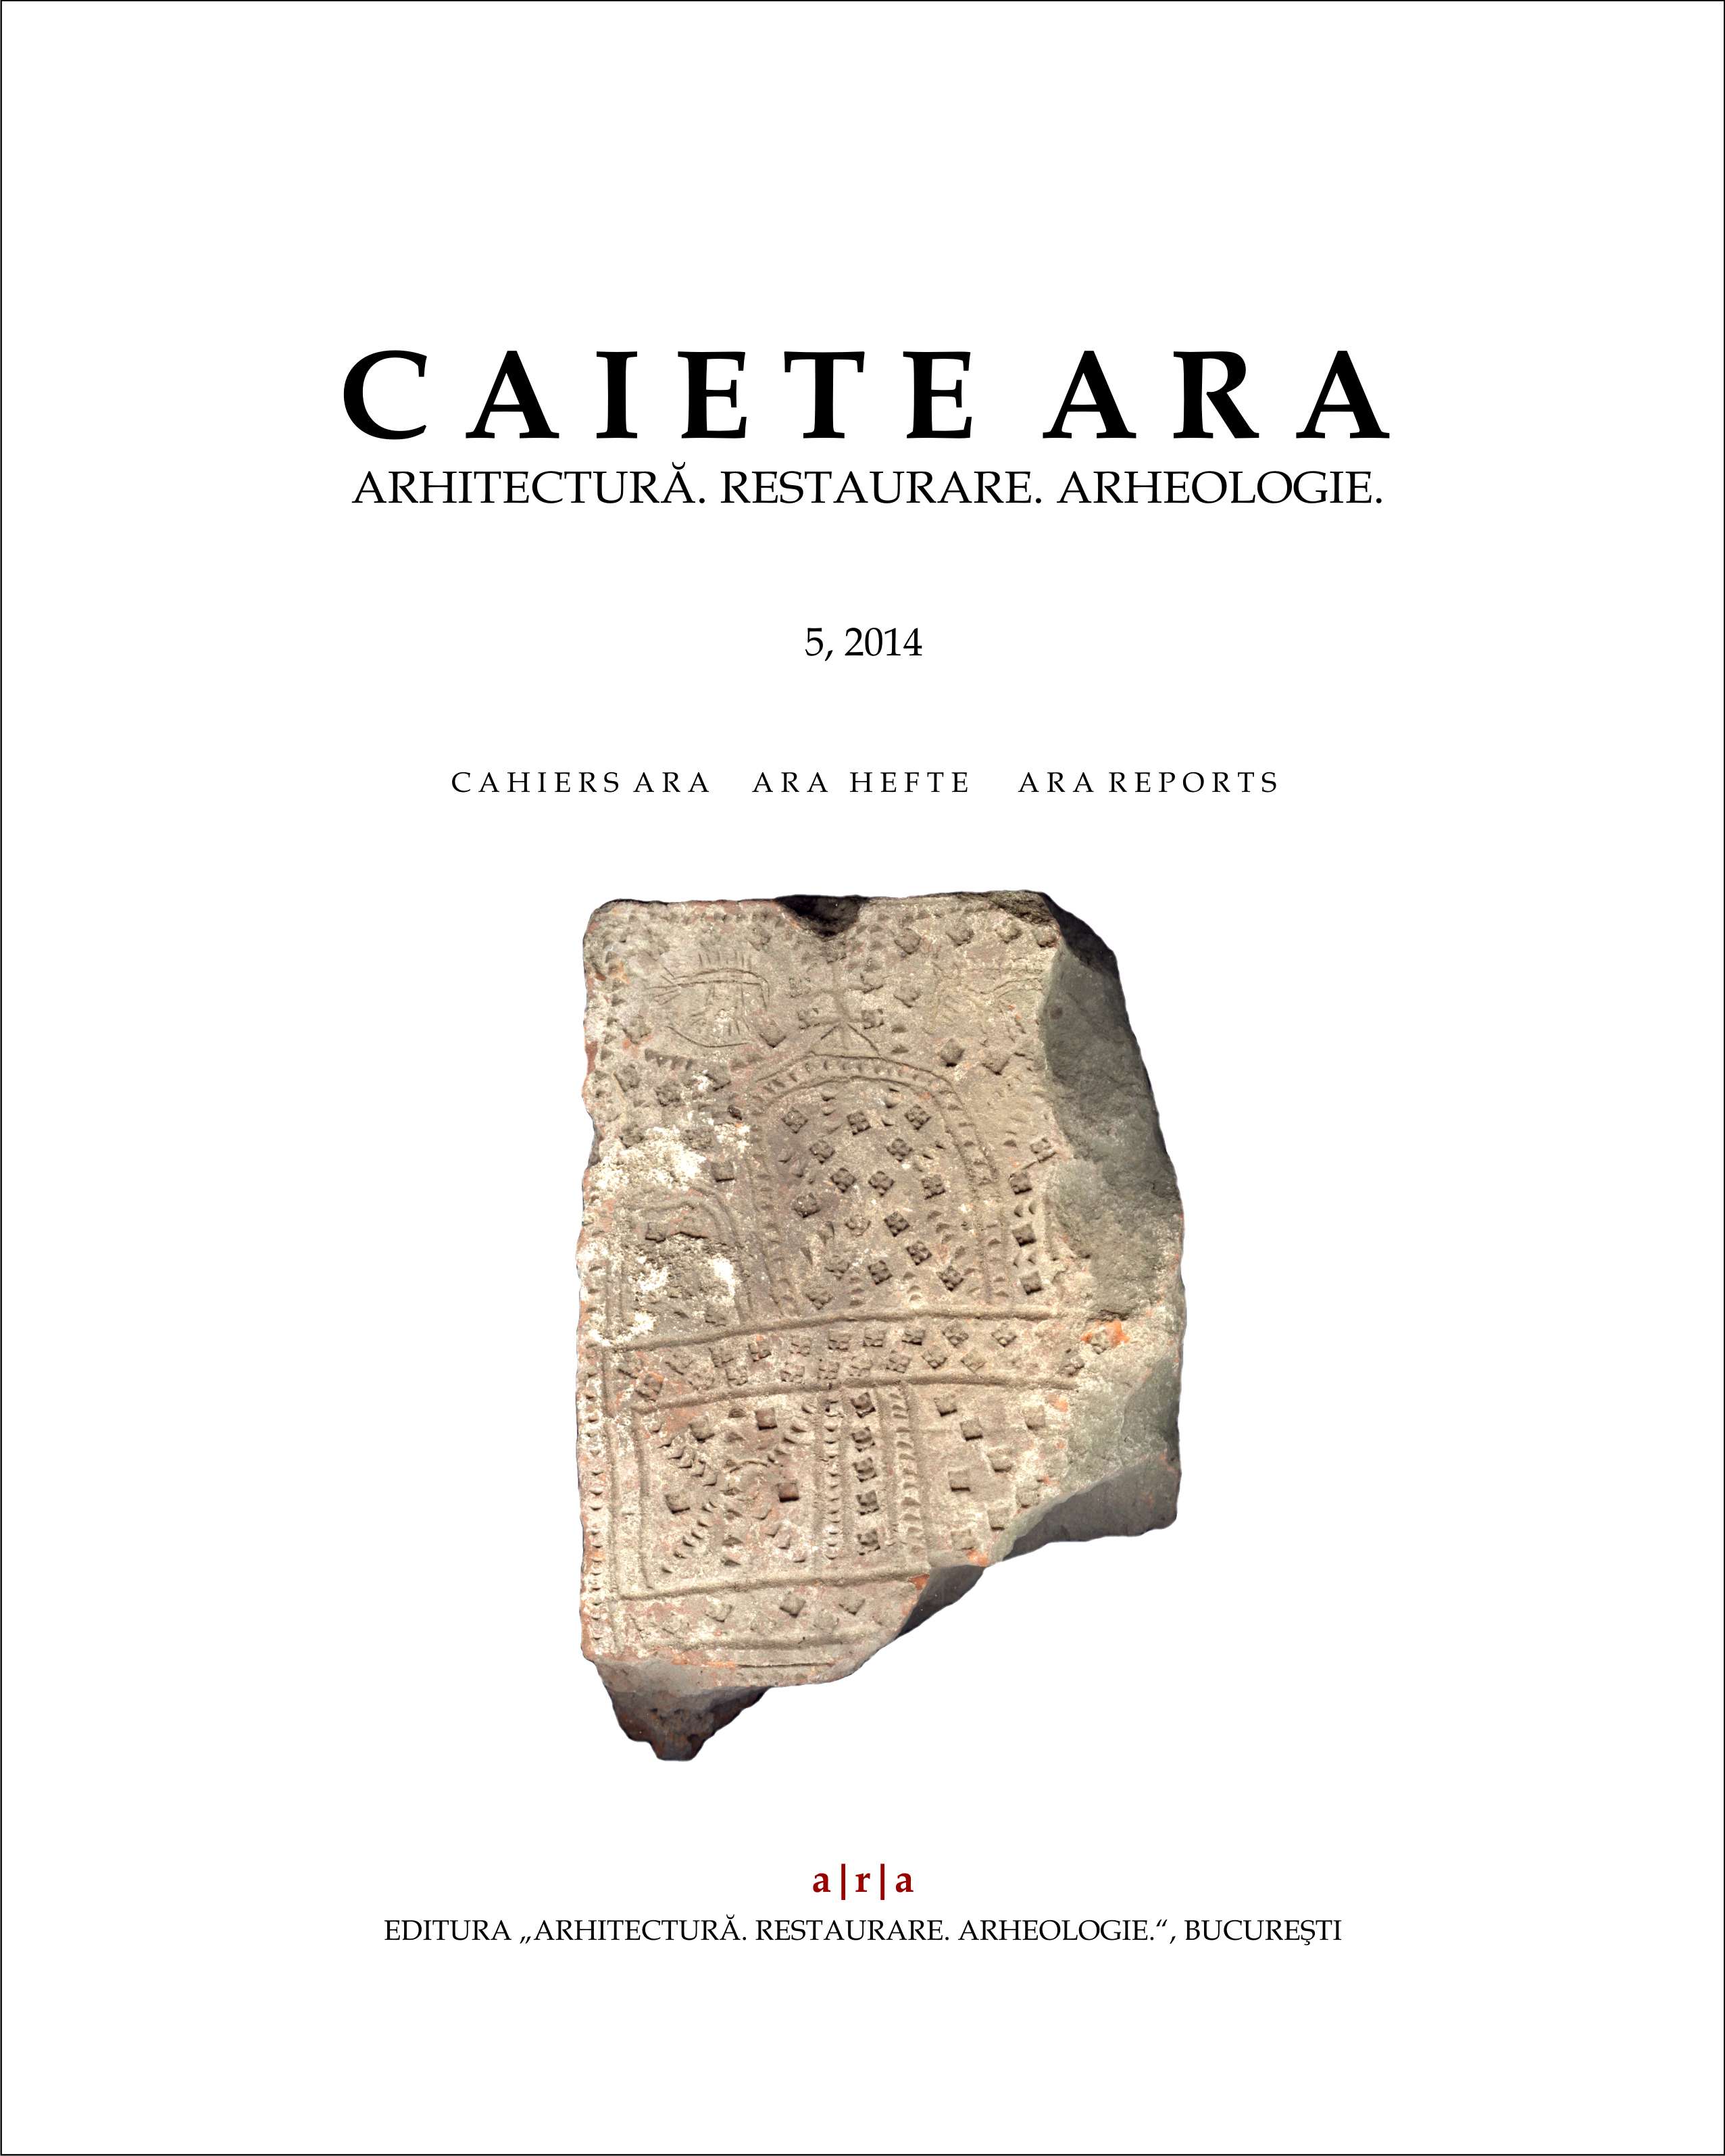 The case of Carthaginian of Istros and the Campanian A in the Black Sea: a ceramologist's point of view  regarding the epigraphic sources